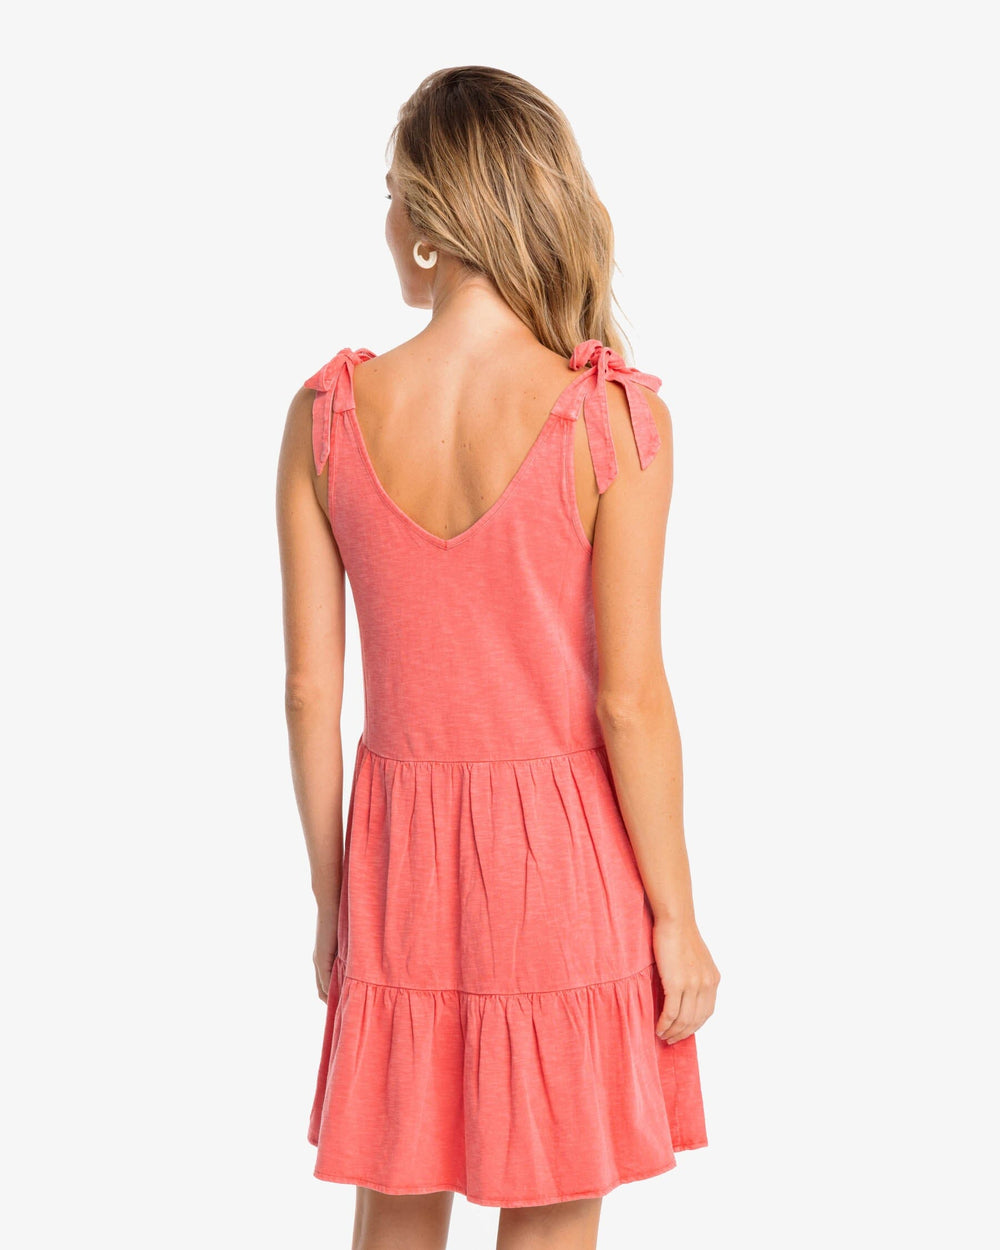 The back view of the Southern Tide Nicole Sun Farer Tiered Tank Dress by Southern Tide - Sunkist Coral